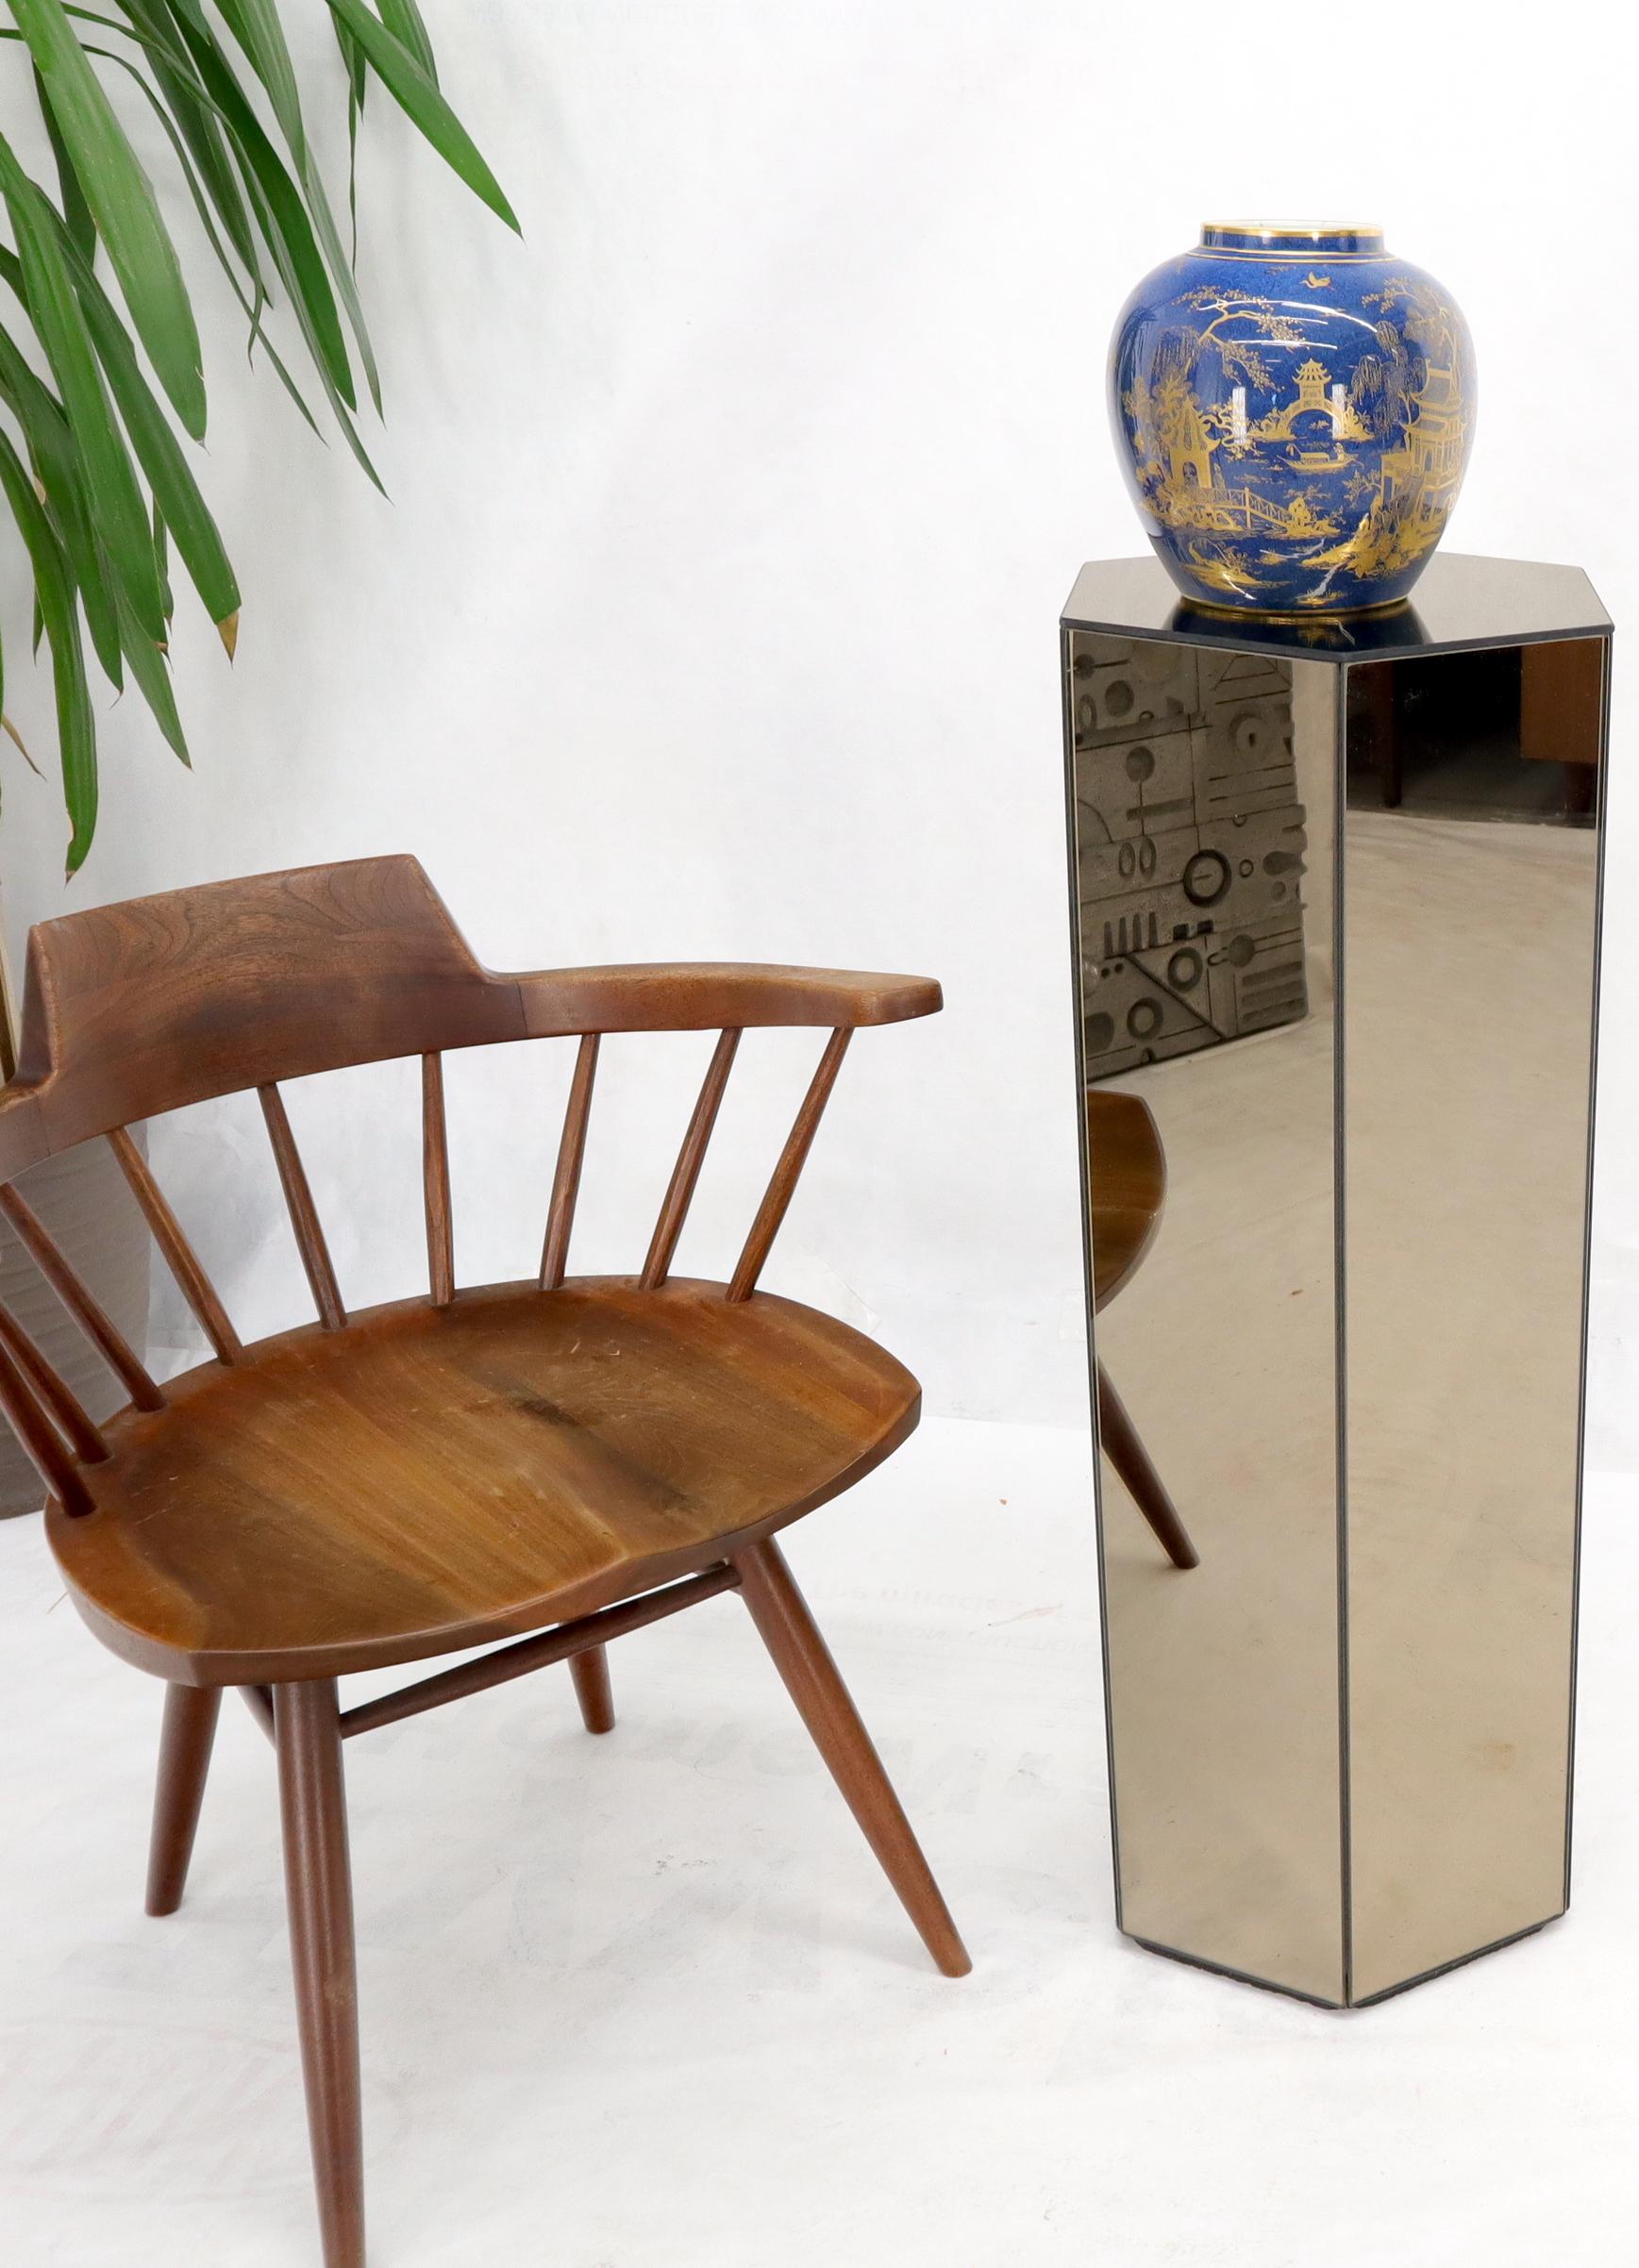 Smoked Mirror Glass Mid-Century Modern Hexagon Shape Pedestal Stand In Good Condition For Sale In Rockaway, NJ